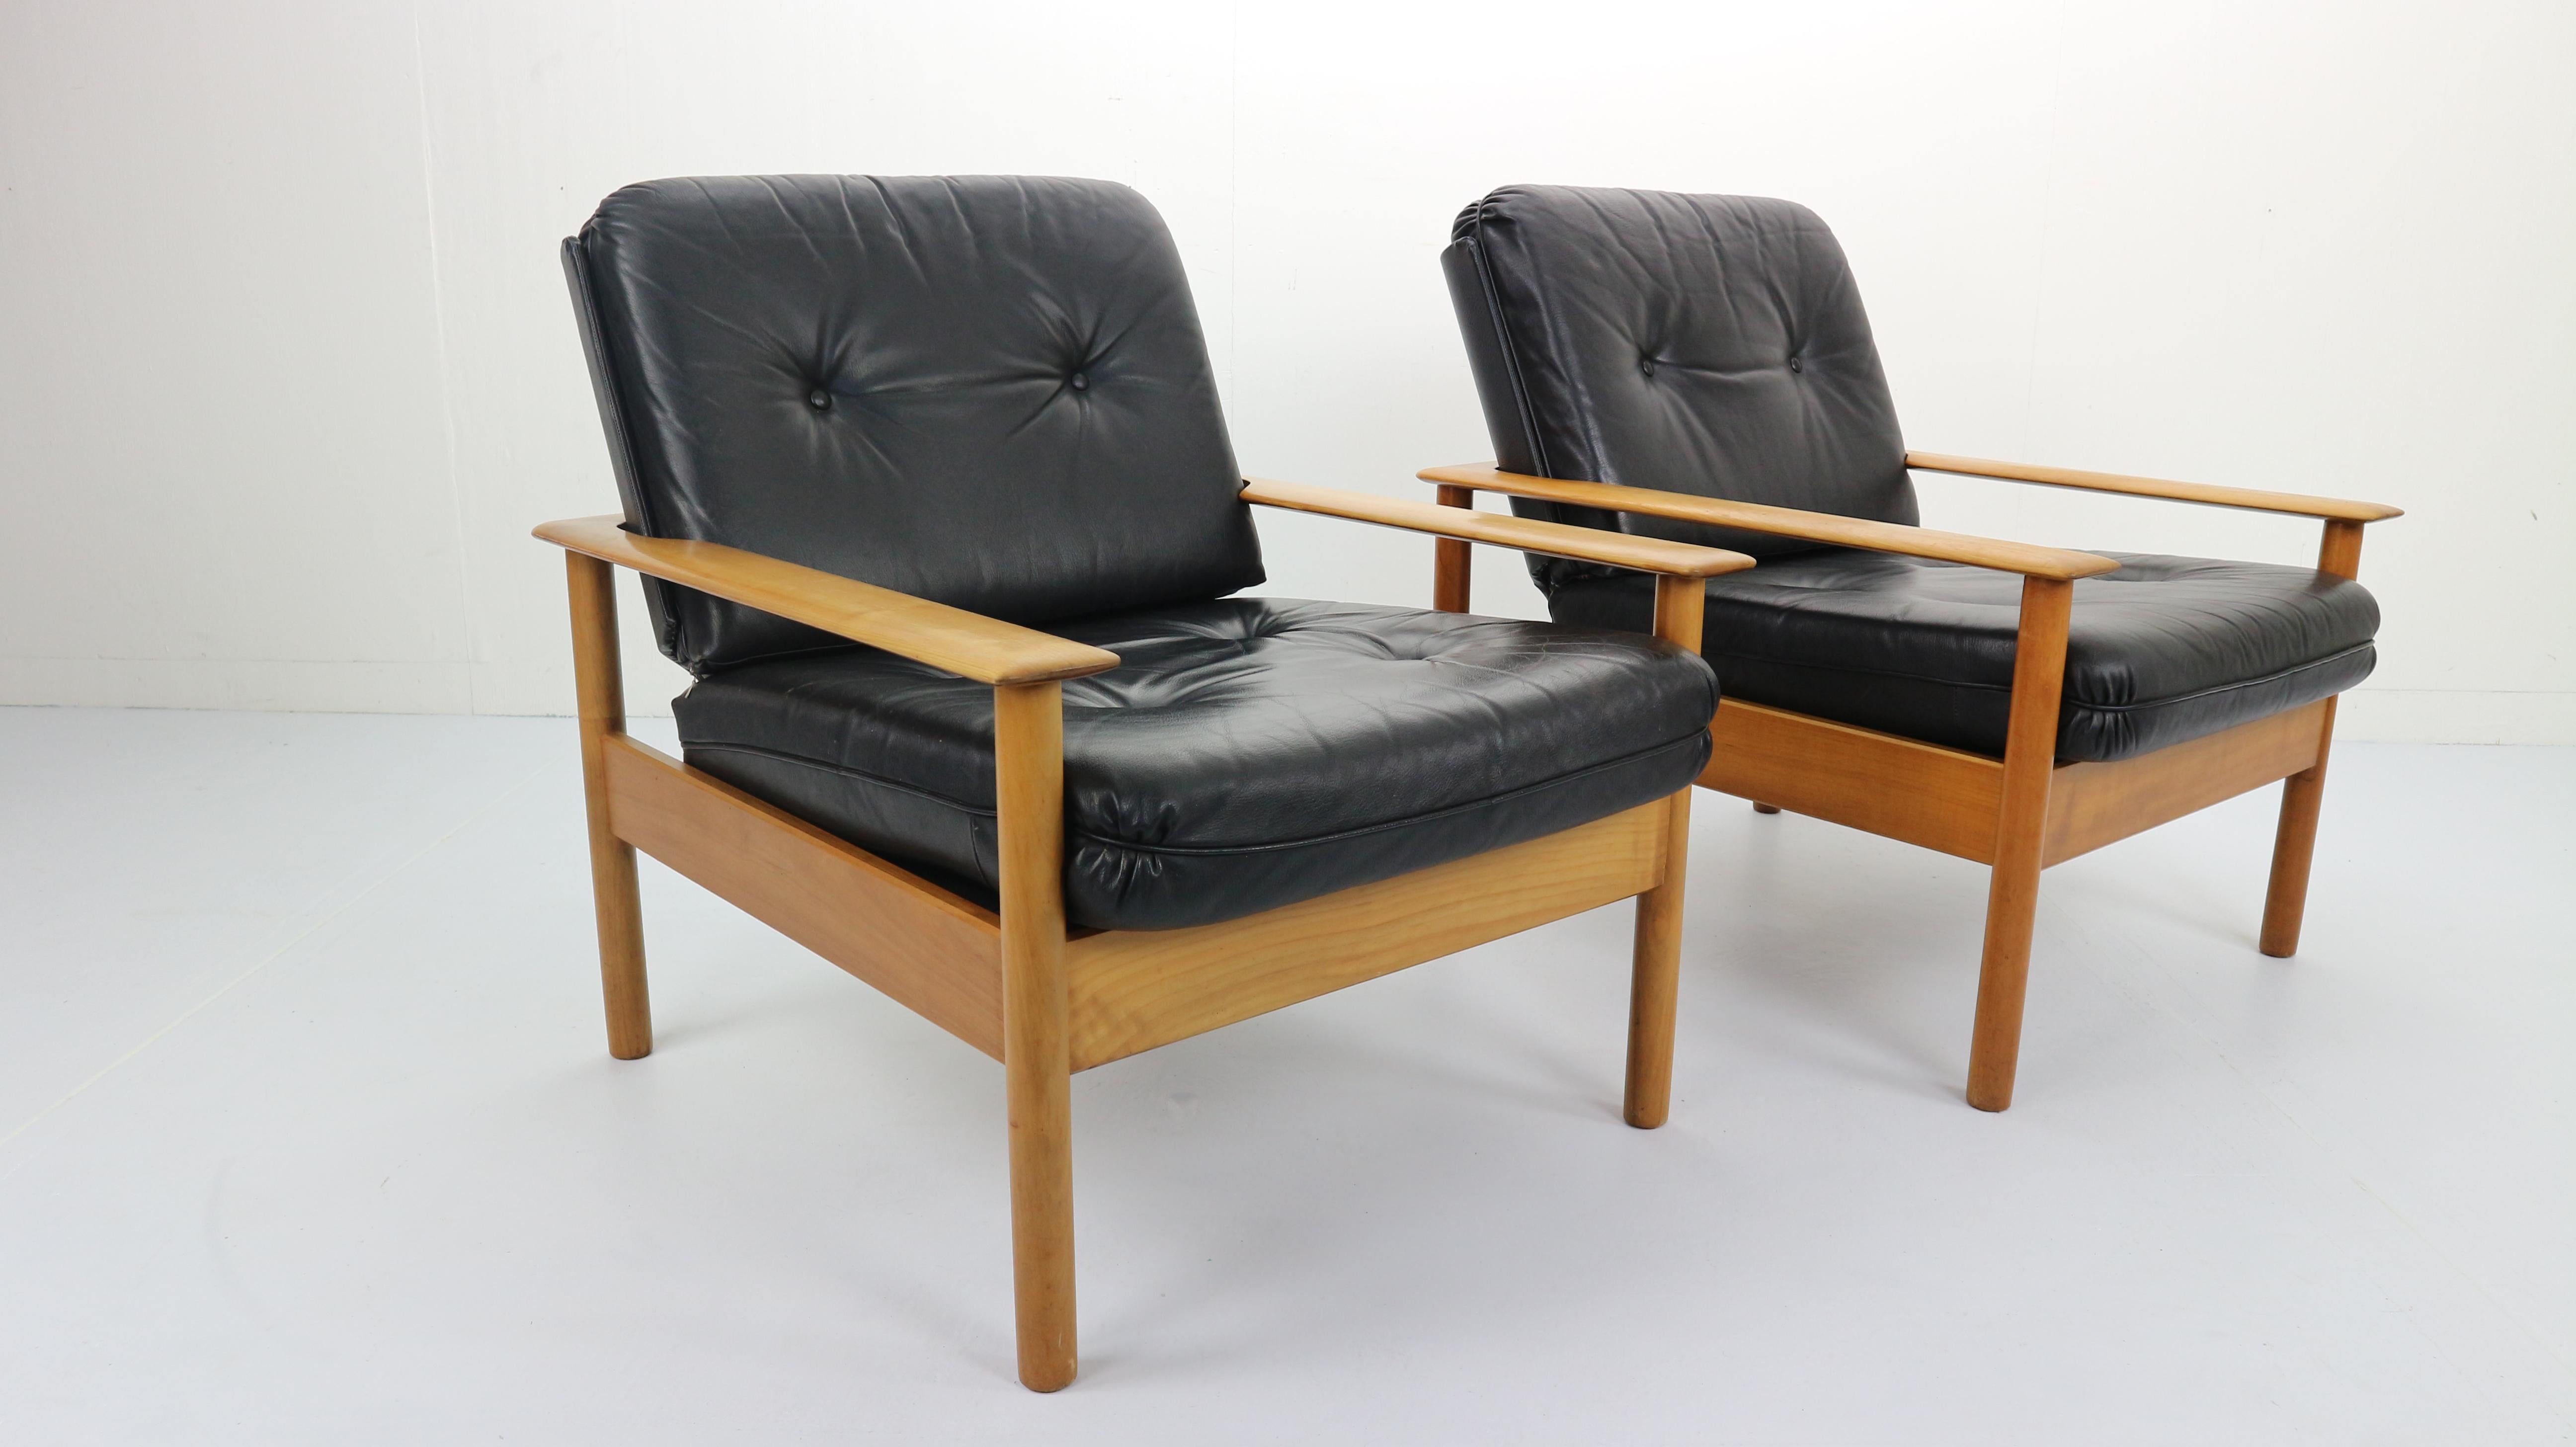 Set of two Mid-Century Modern- Scandinavian design lounge chairs 1960s.
Curved beech wood details gives an elegant finish touch of framing leather cushions.
Comfortable seating.
In good original condition with minor wear consistent with age and